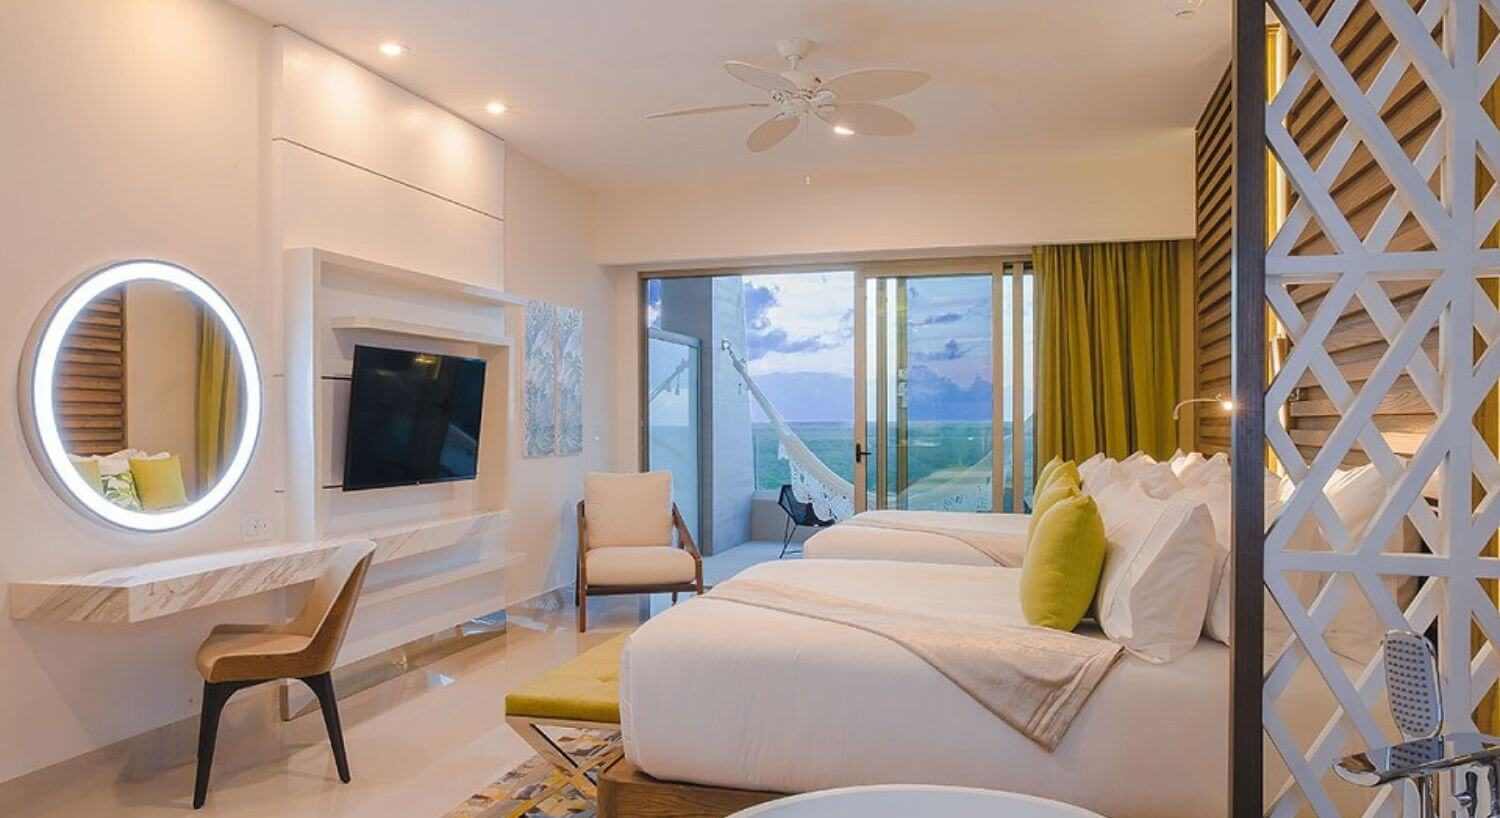 A bedroom with 2 queen beds, a sitting bench at the foot of one bed, a flat screen TV and writing desk with chair and mirror, a chair in the corner of the room, and sliding doors that lead out to a balcony with patio furniture and a hammock.